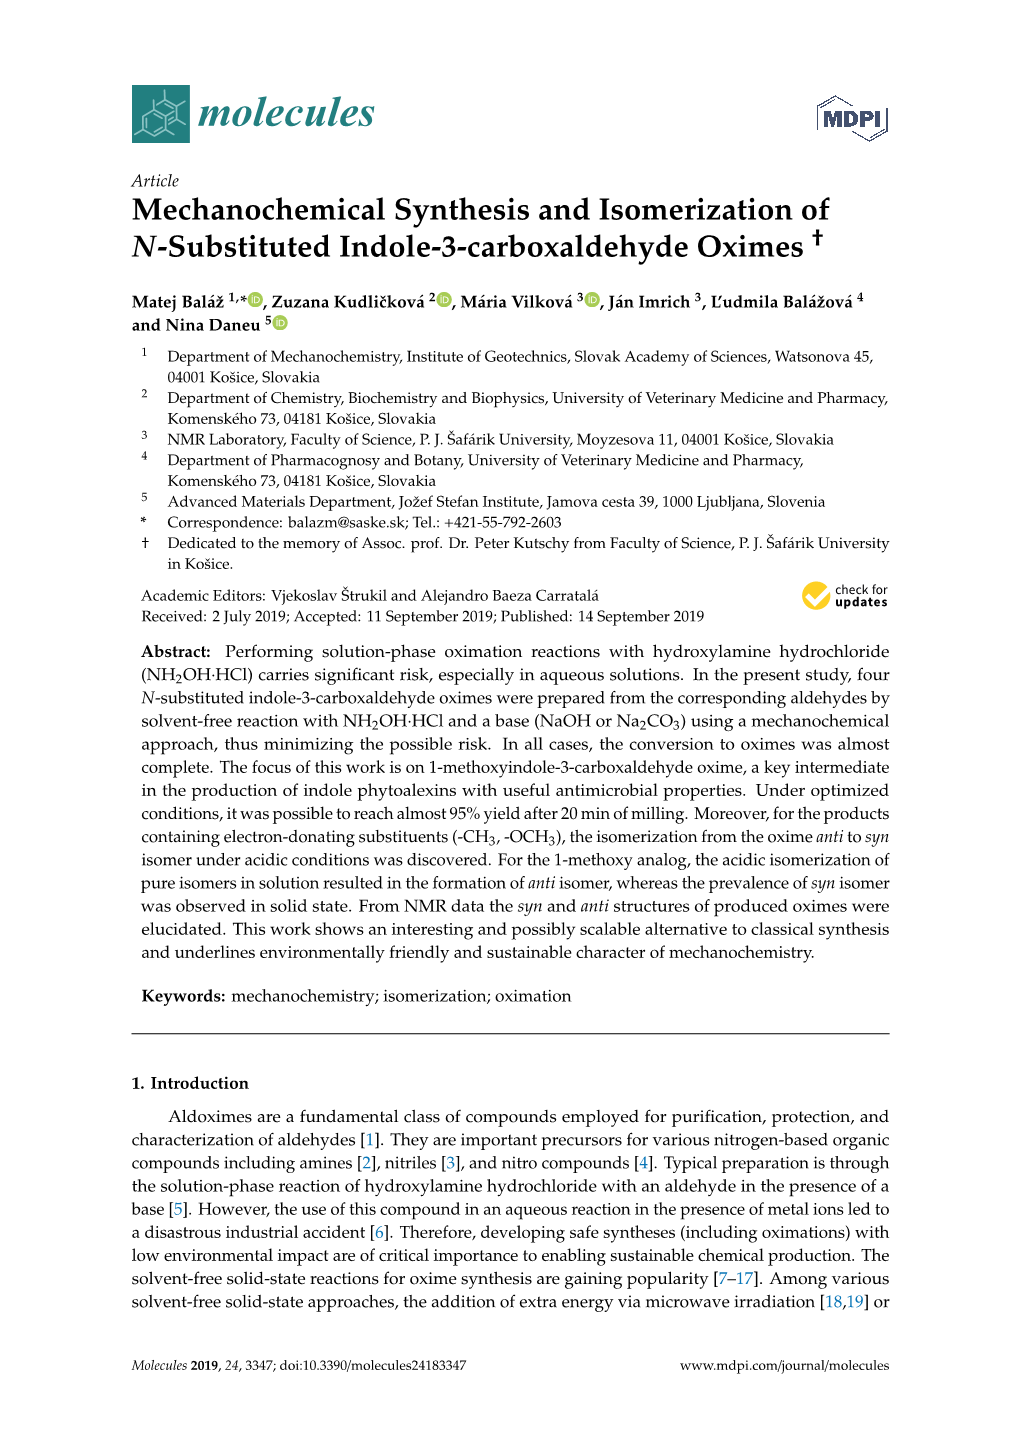 Mechanochemical Synthesis and Isomerization of N-Substituted